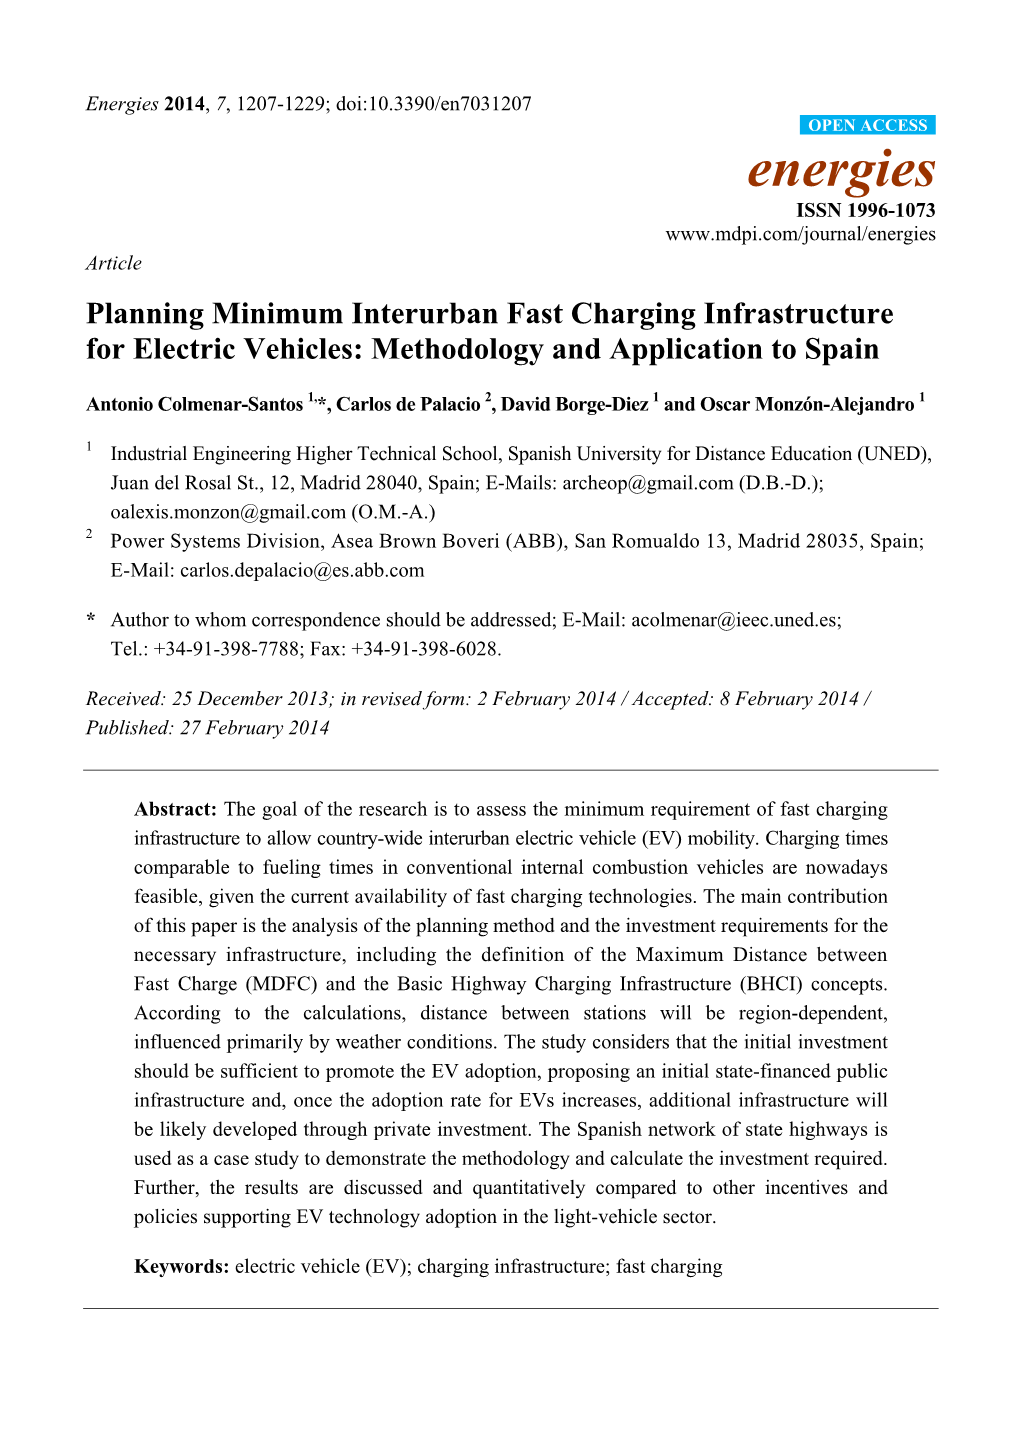 Planning Minimum Interurban Fast Charging Infrastructure for Electric Vehicles: Methodology and Application to Spain